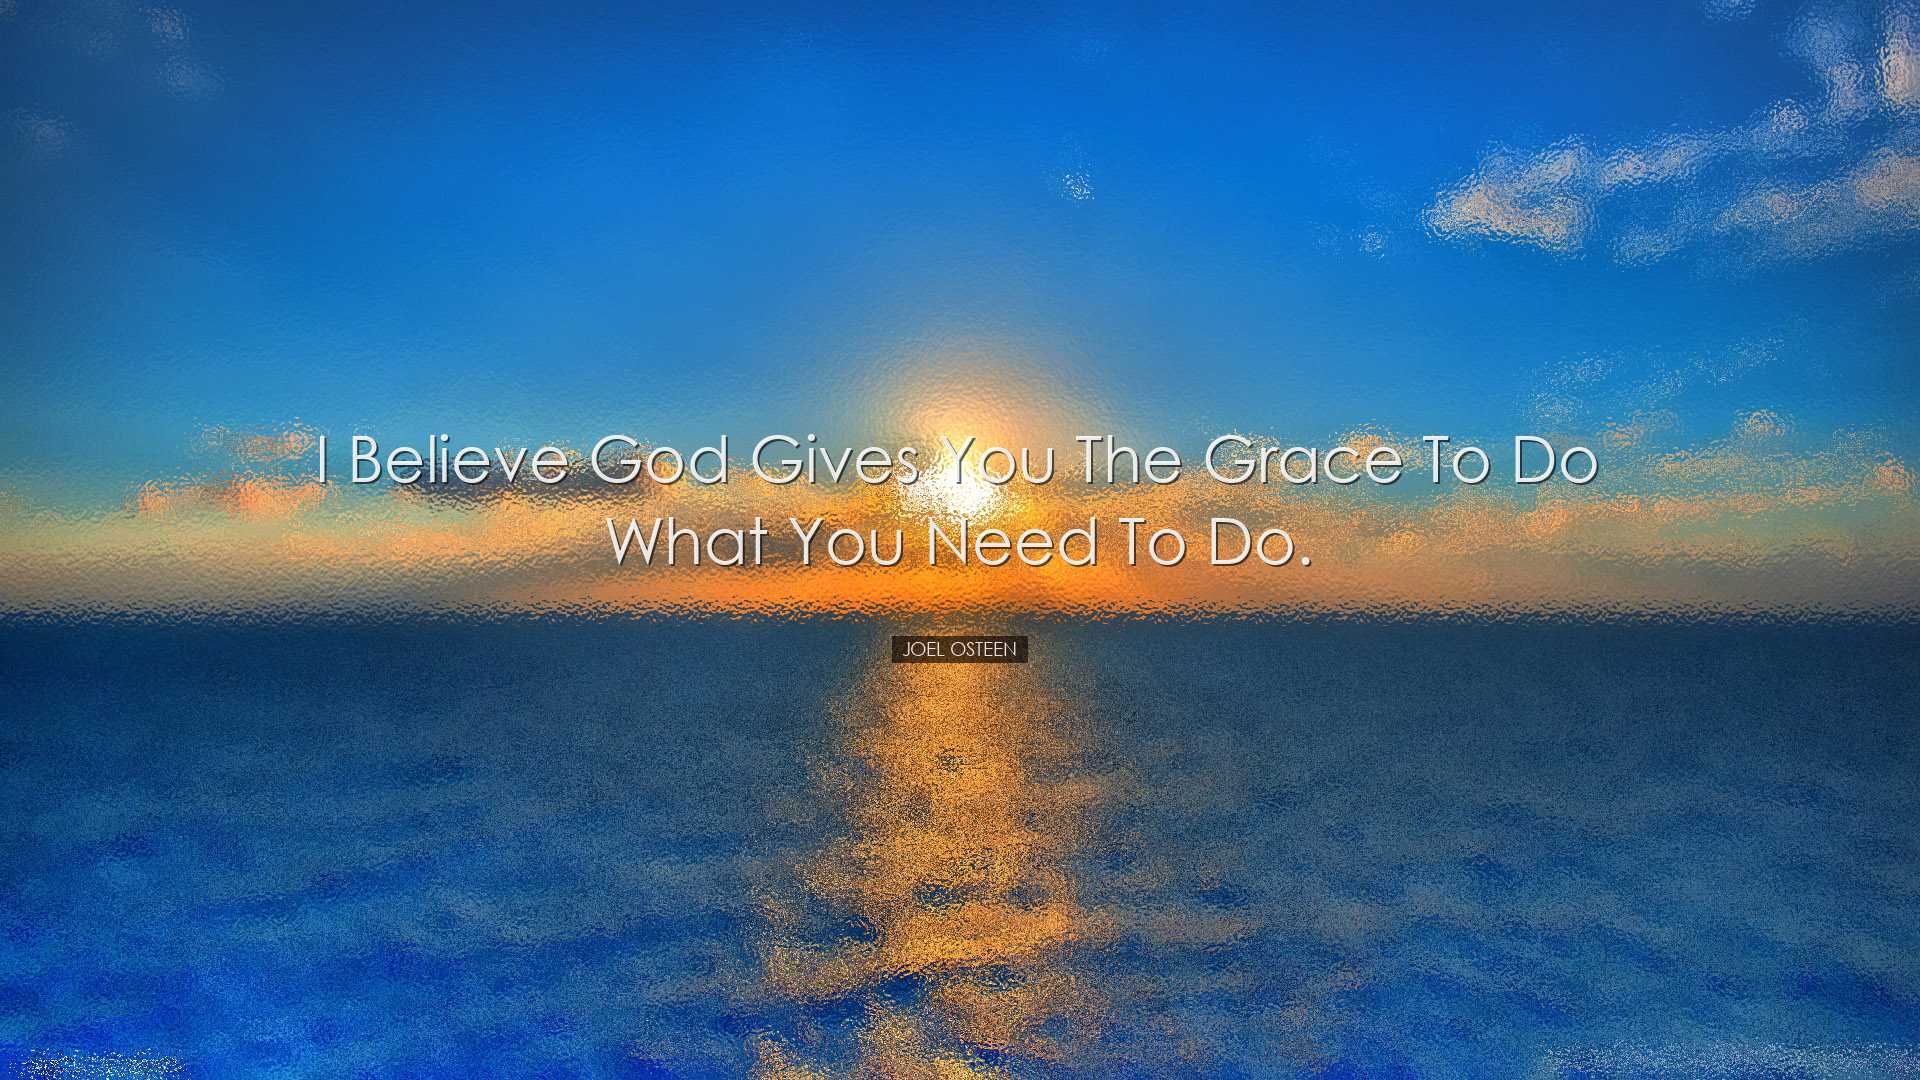 I believe God gives you the grace to do what you need to do. - Joe